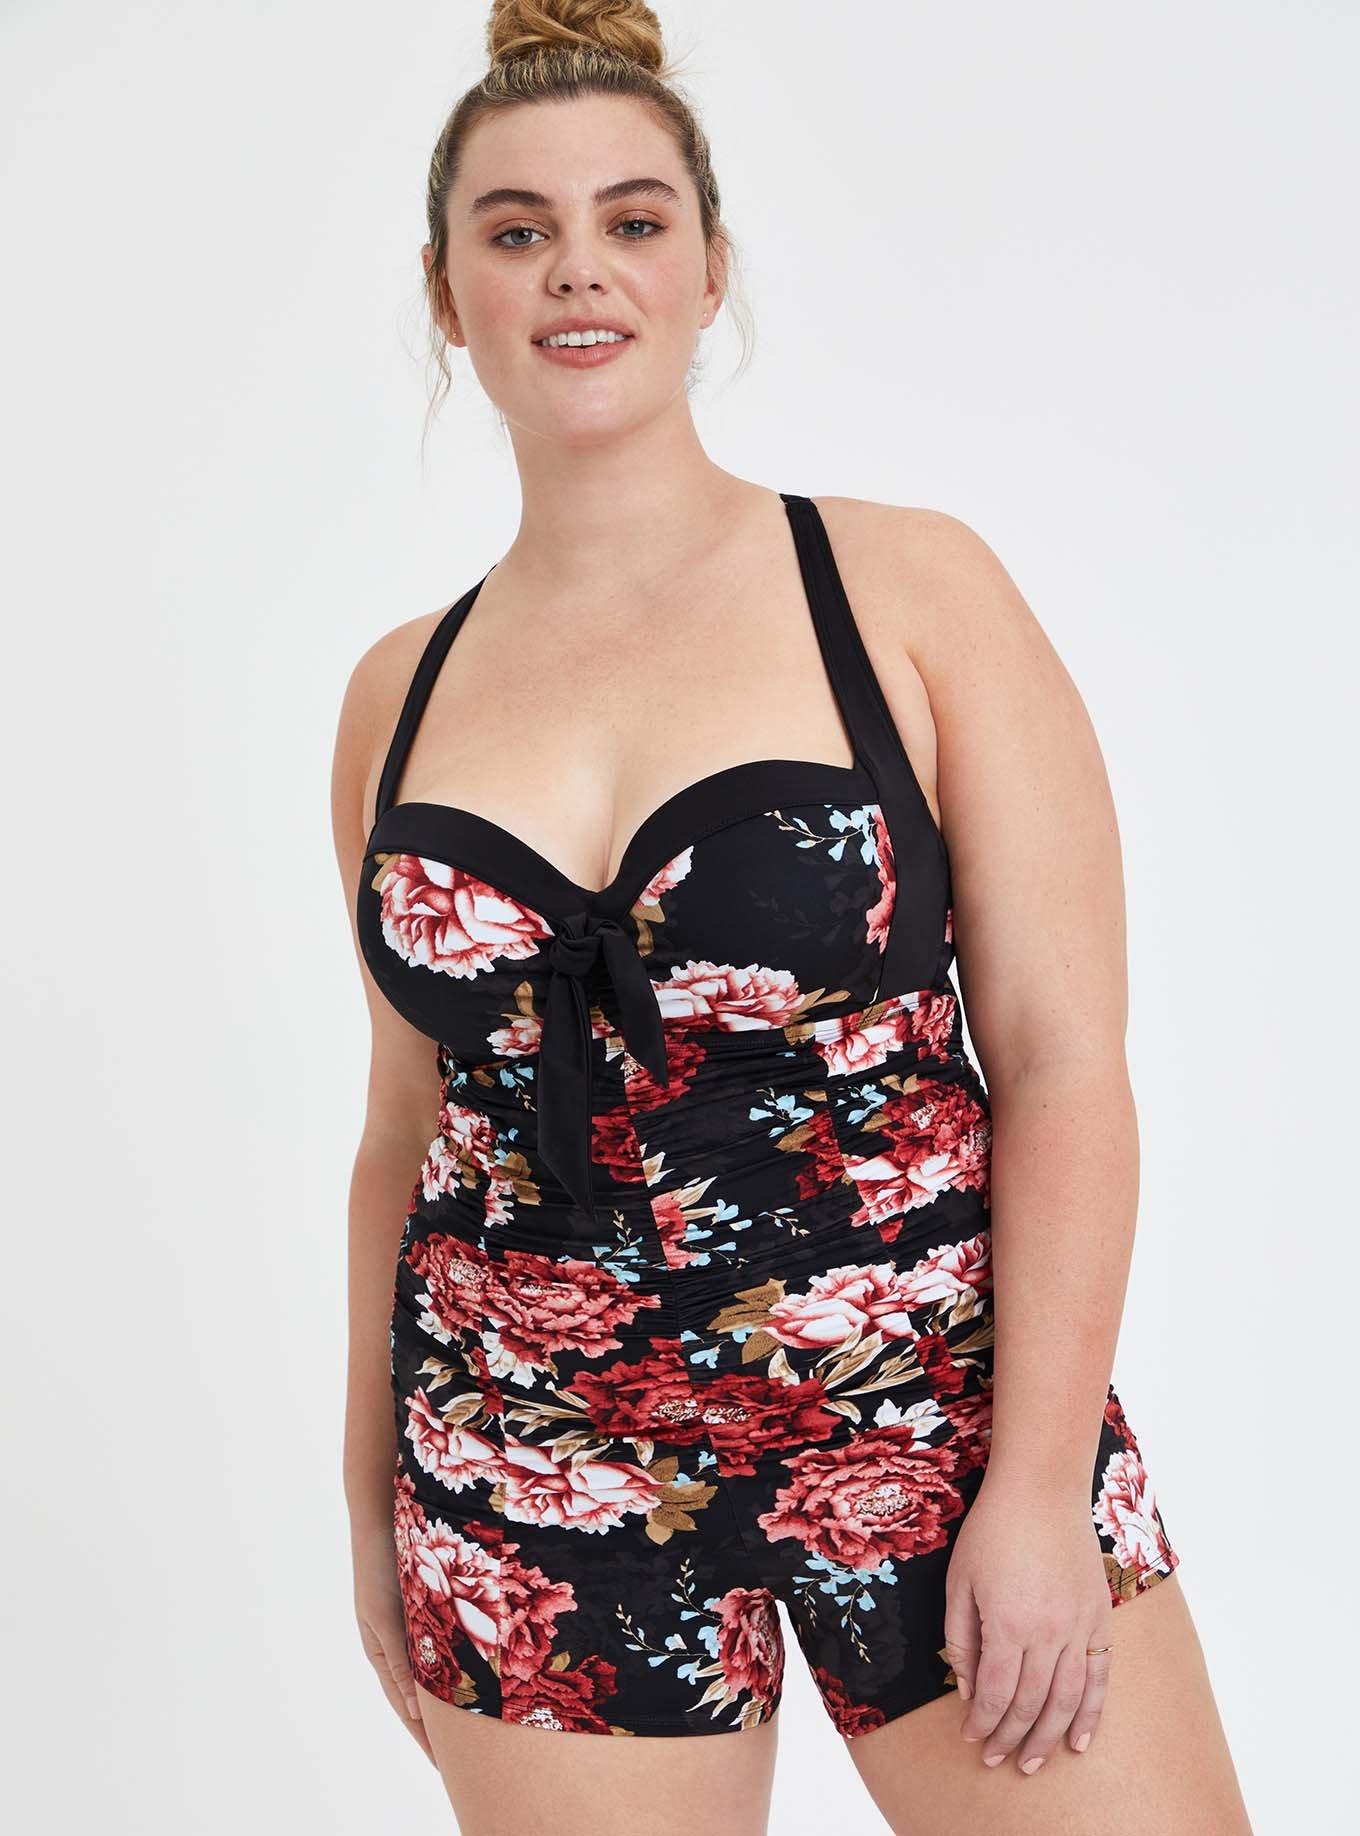 Swim Romper Built In Bra Built In Bra And Leggings Swim Romper Built In Bra  Swim High Waist Bikini Sexy Two Piece Swimsuit